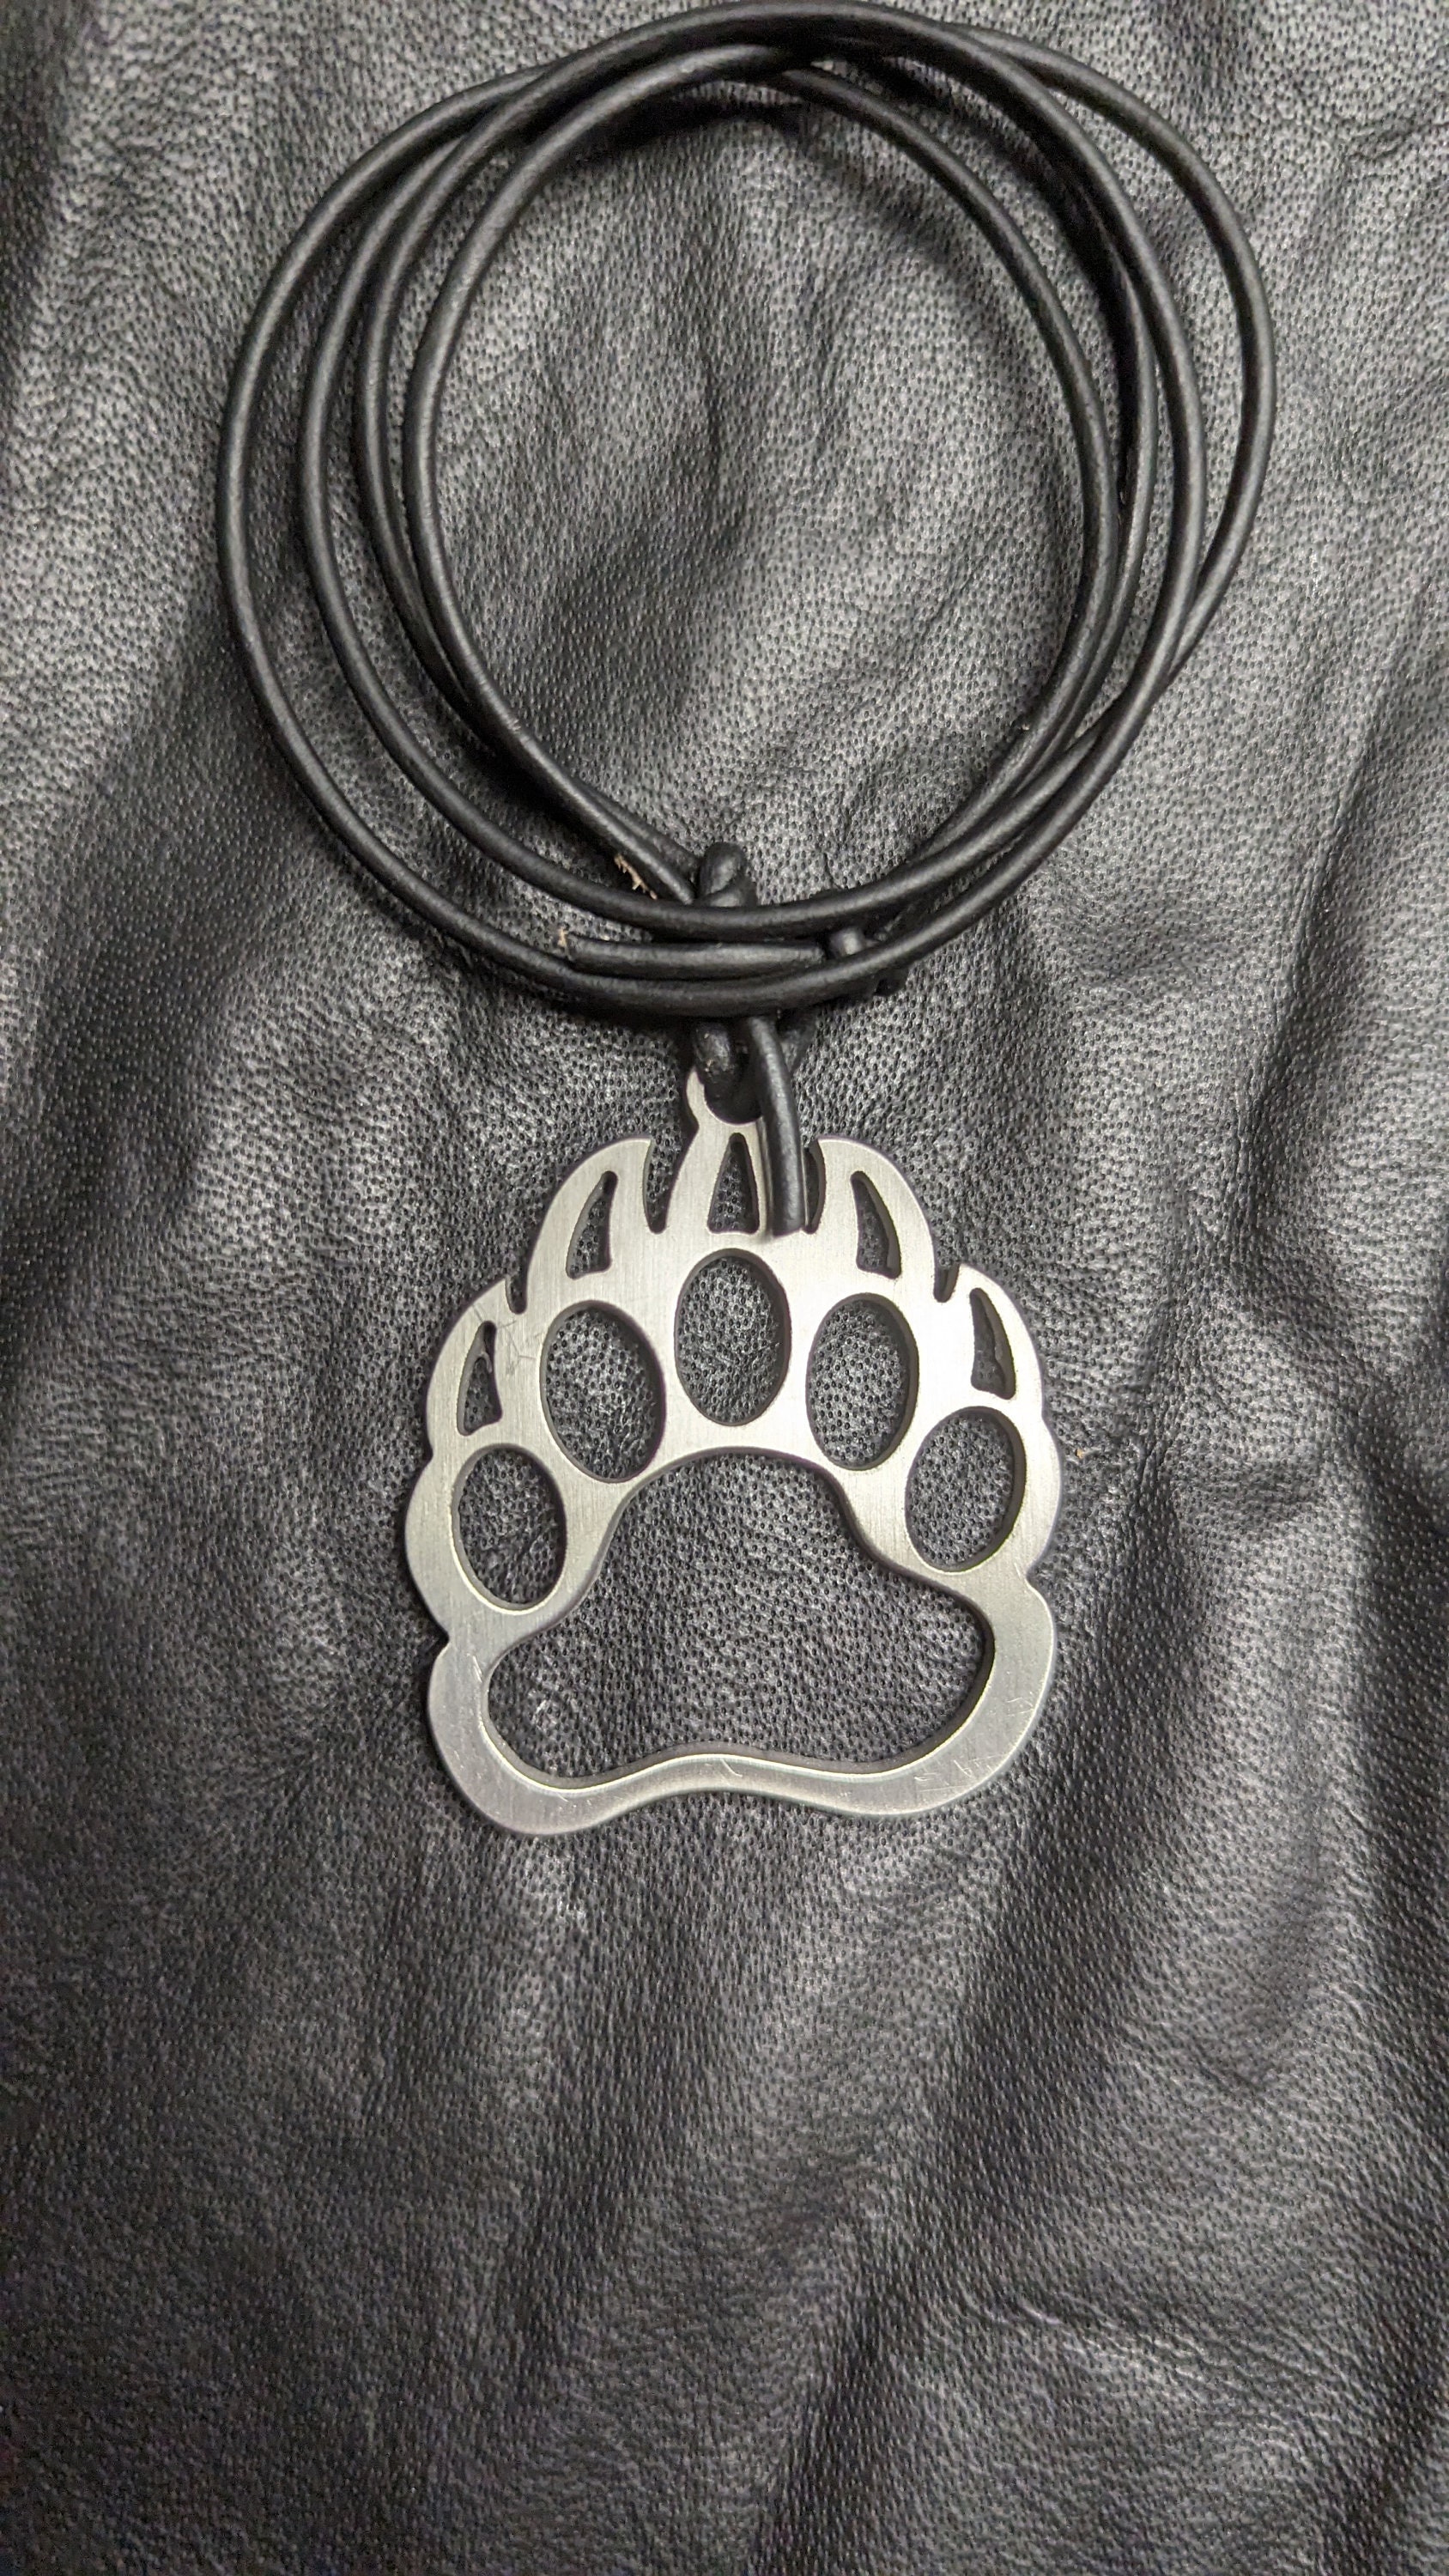 Stainless Steel Dog Tags by Cockeye Kink – Leather64TEN